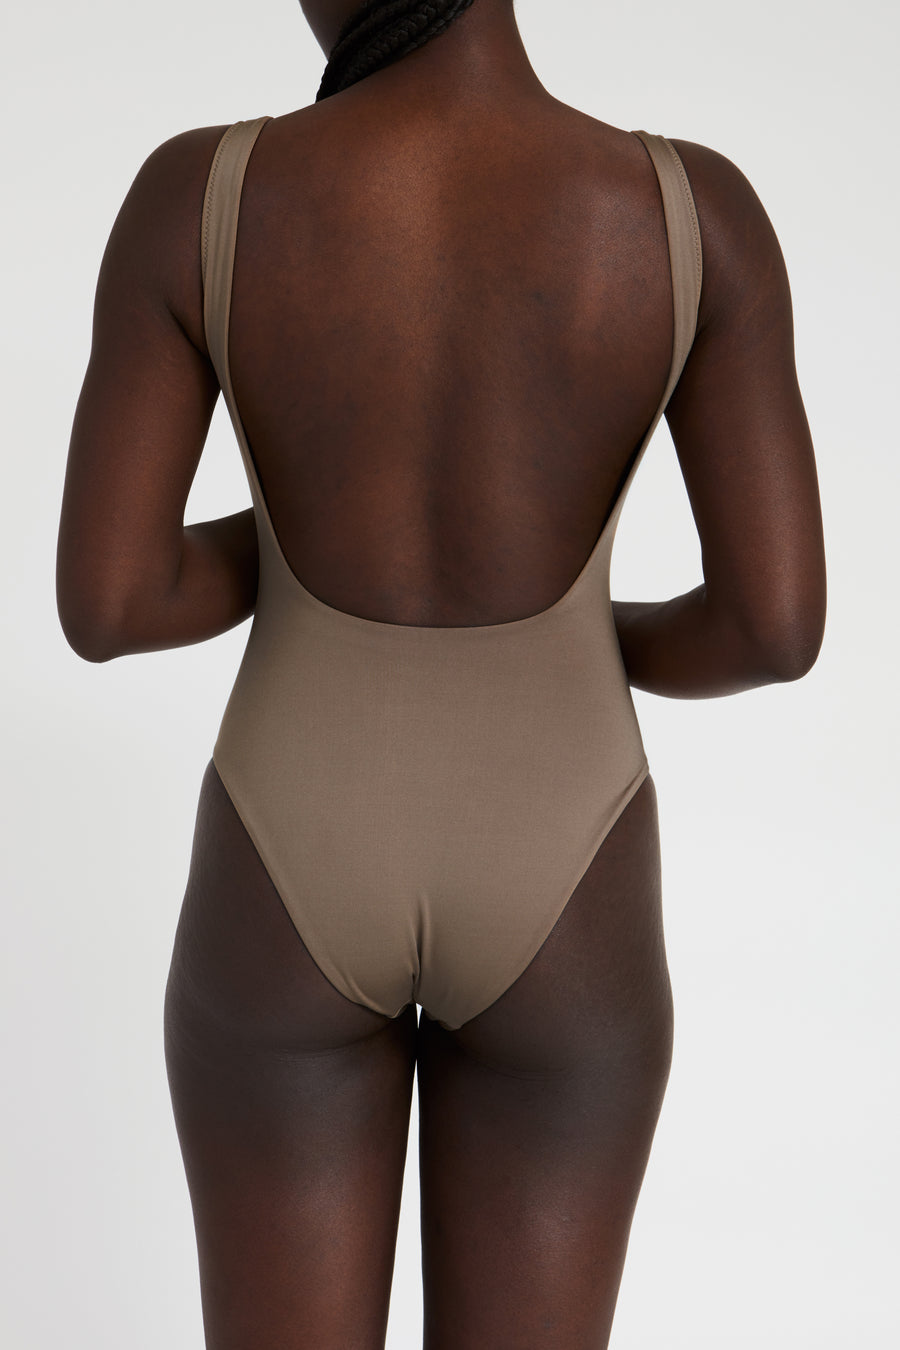 Swimsuit – square, brown